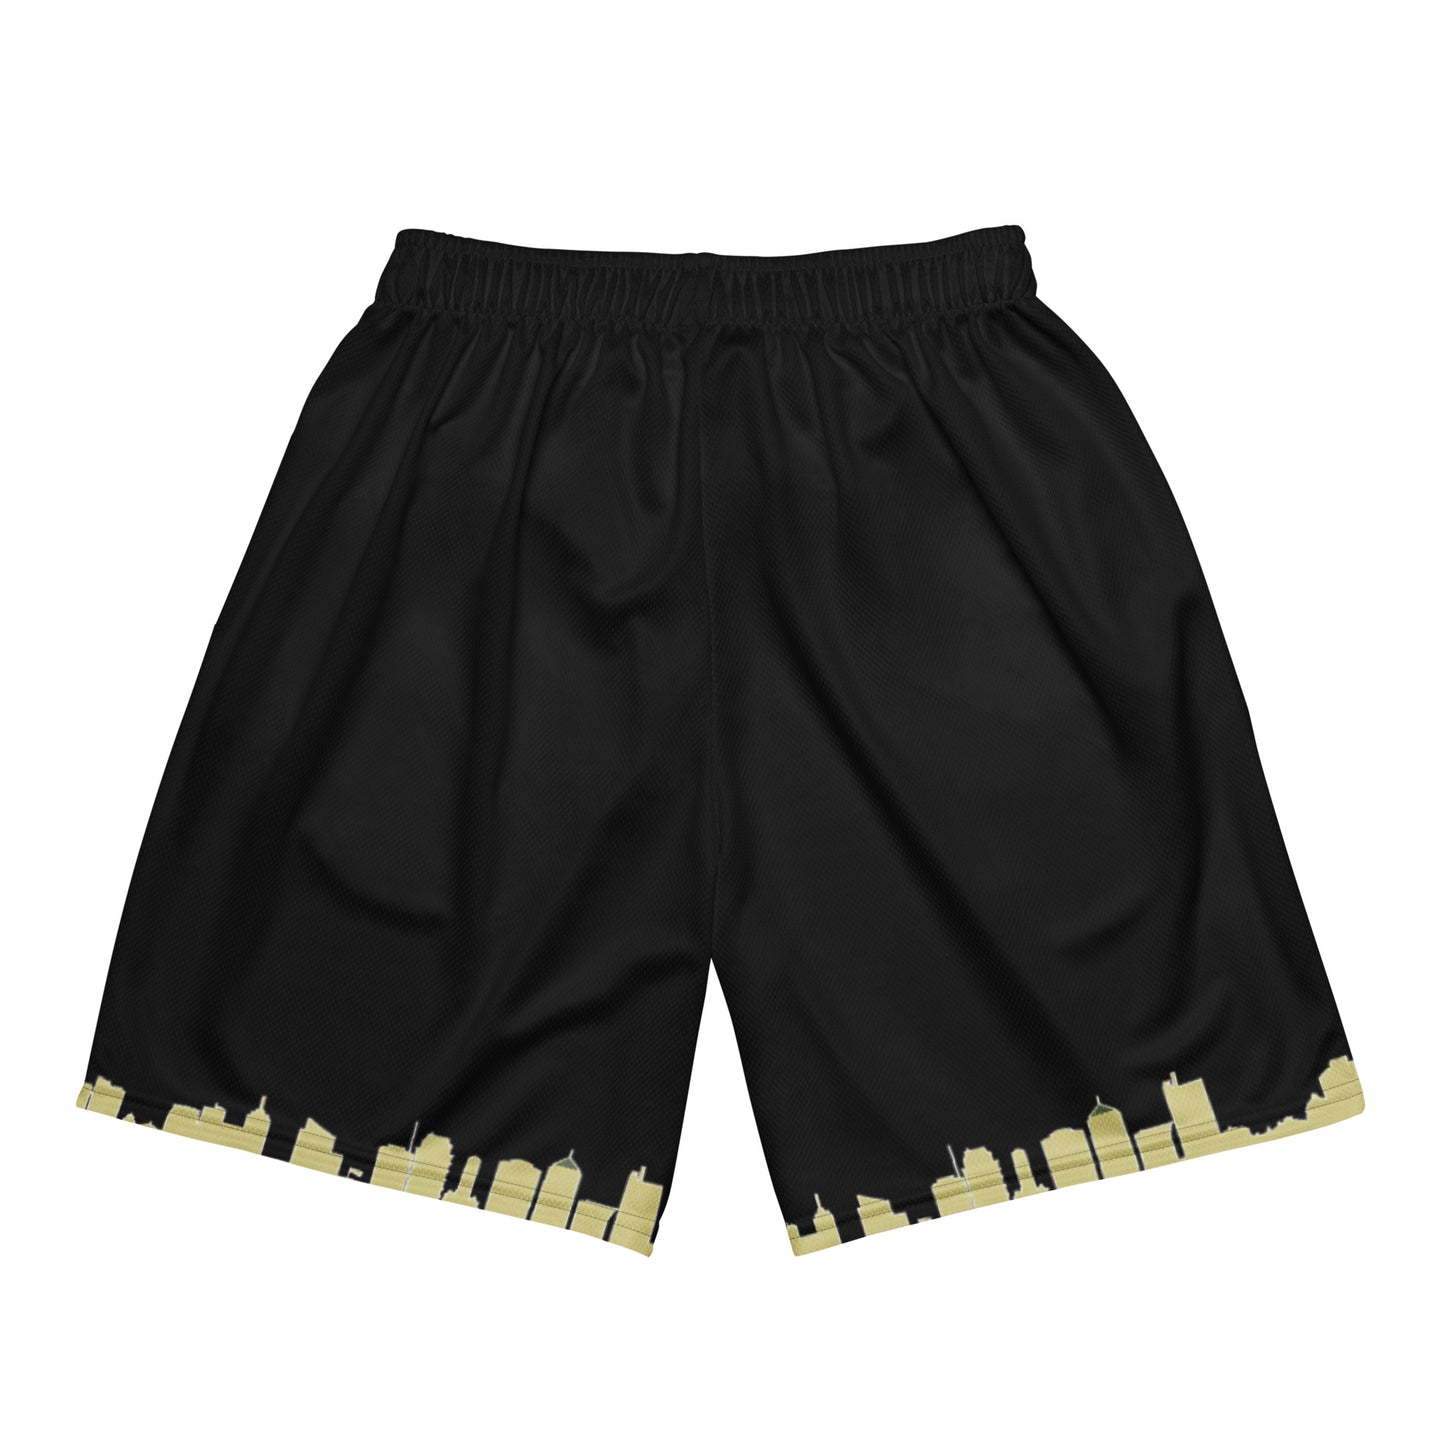 Grow The Game Phillipines Shorts